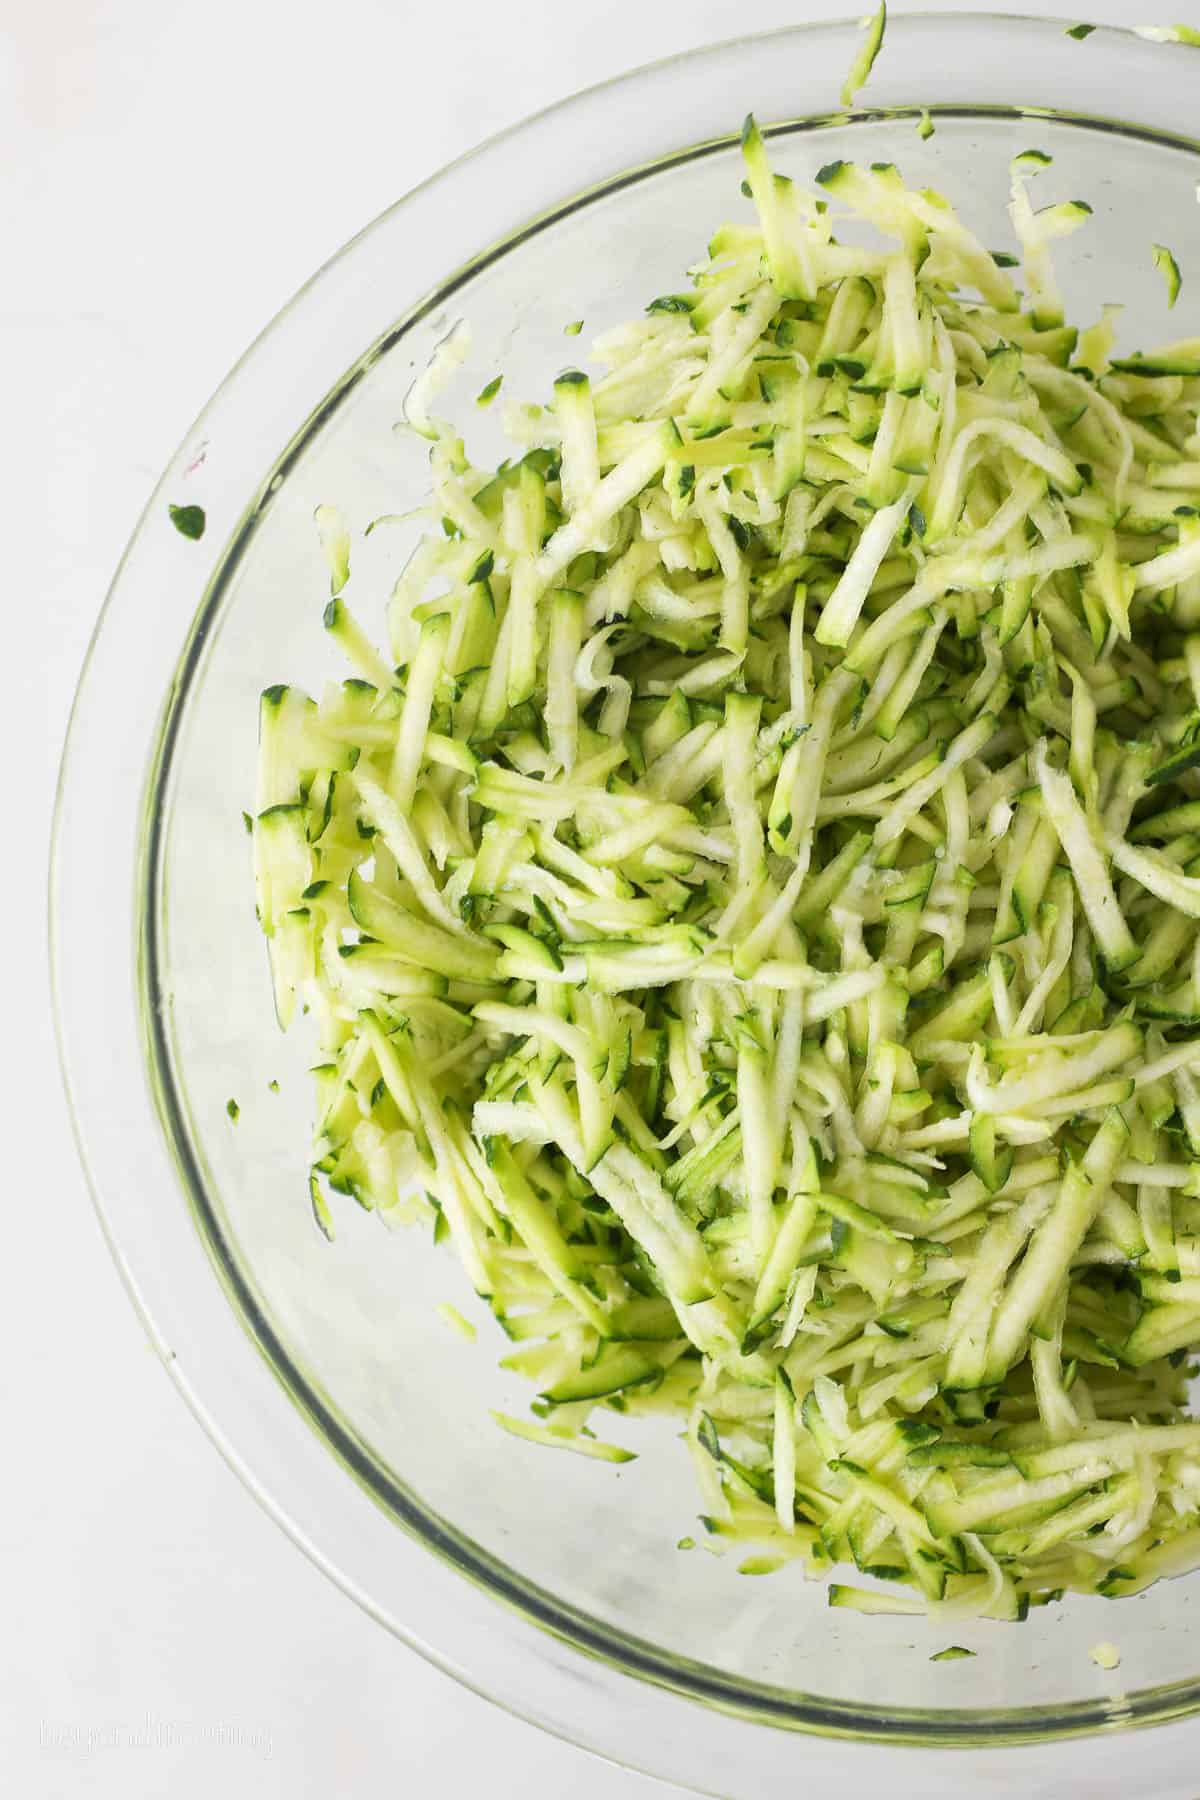 Overhead view of shredded zucchini in a glass bowl.